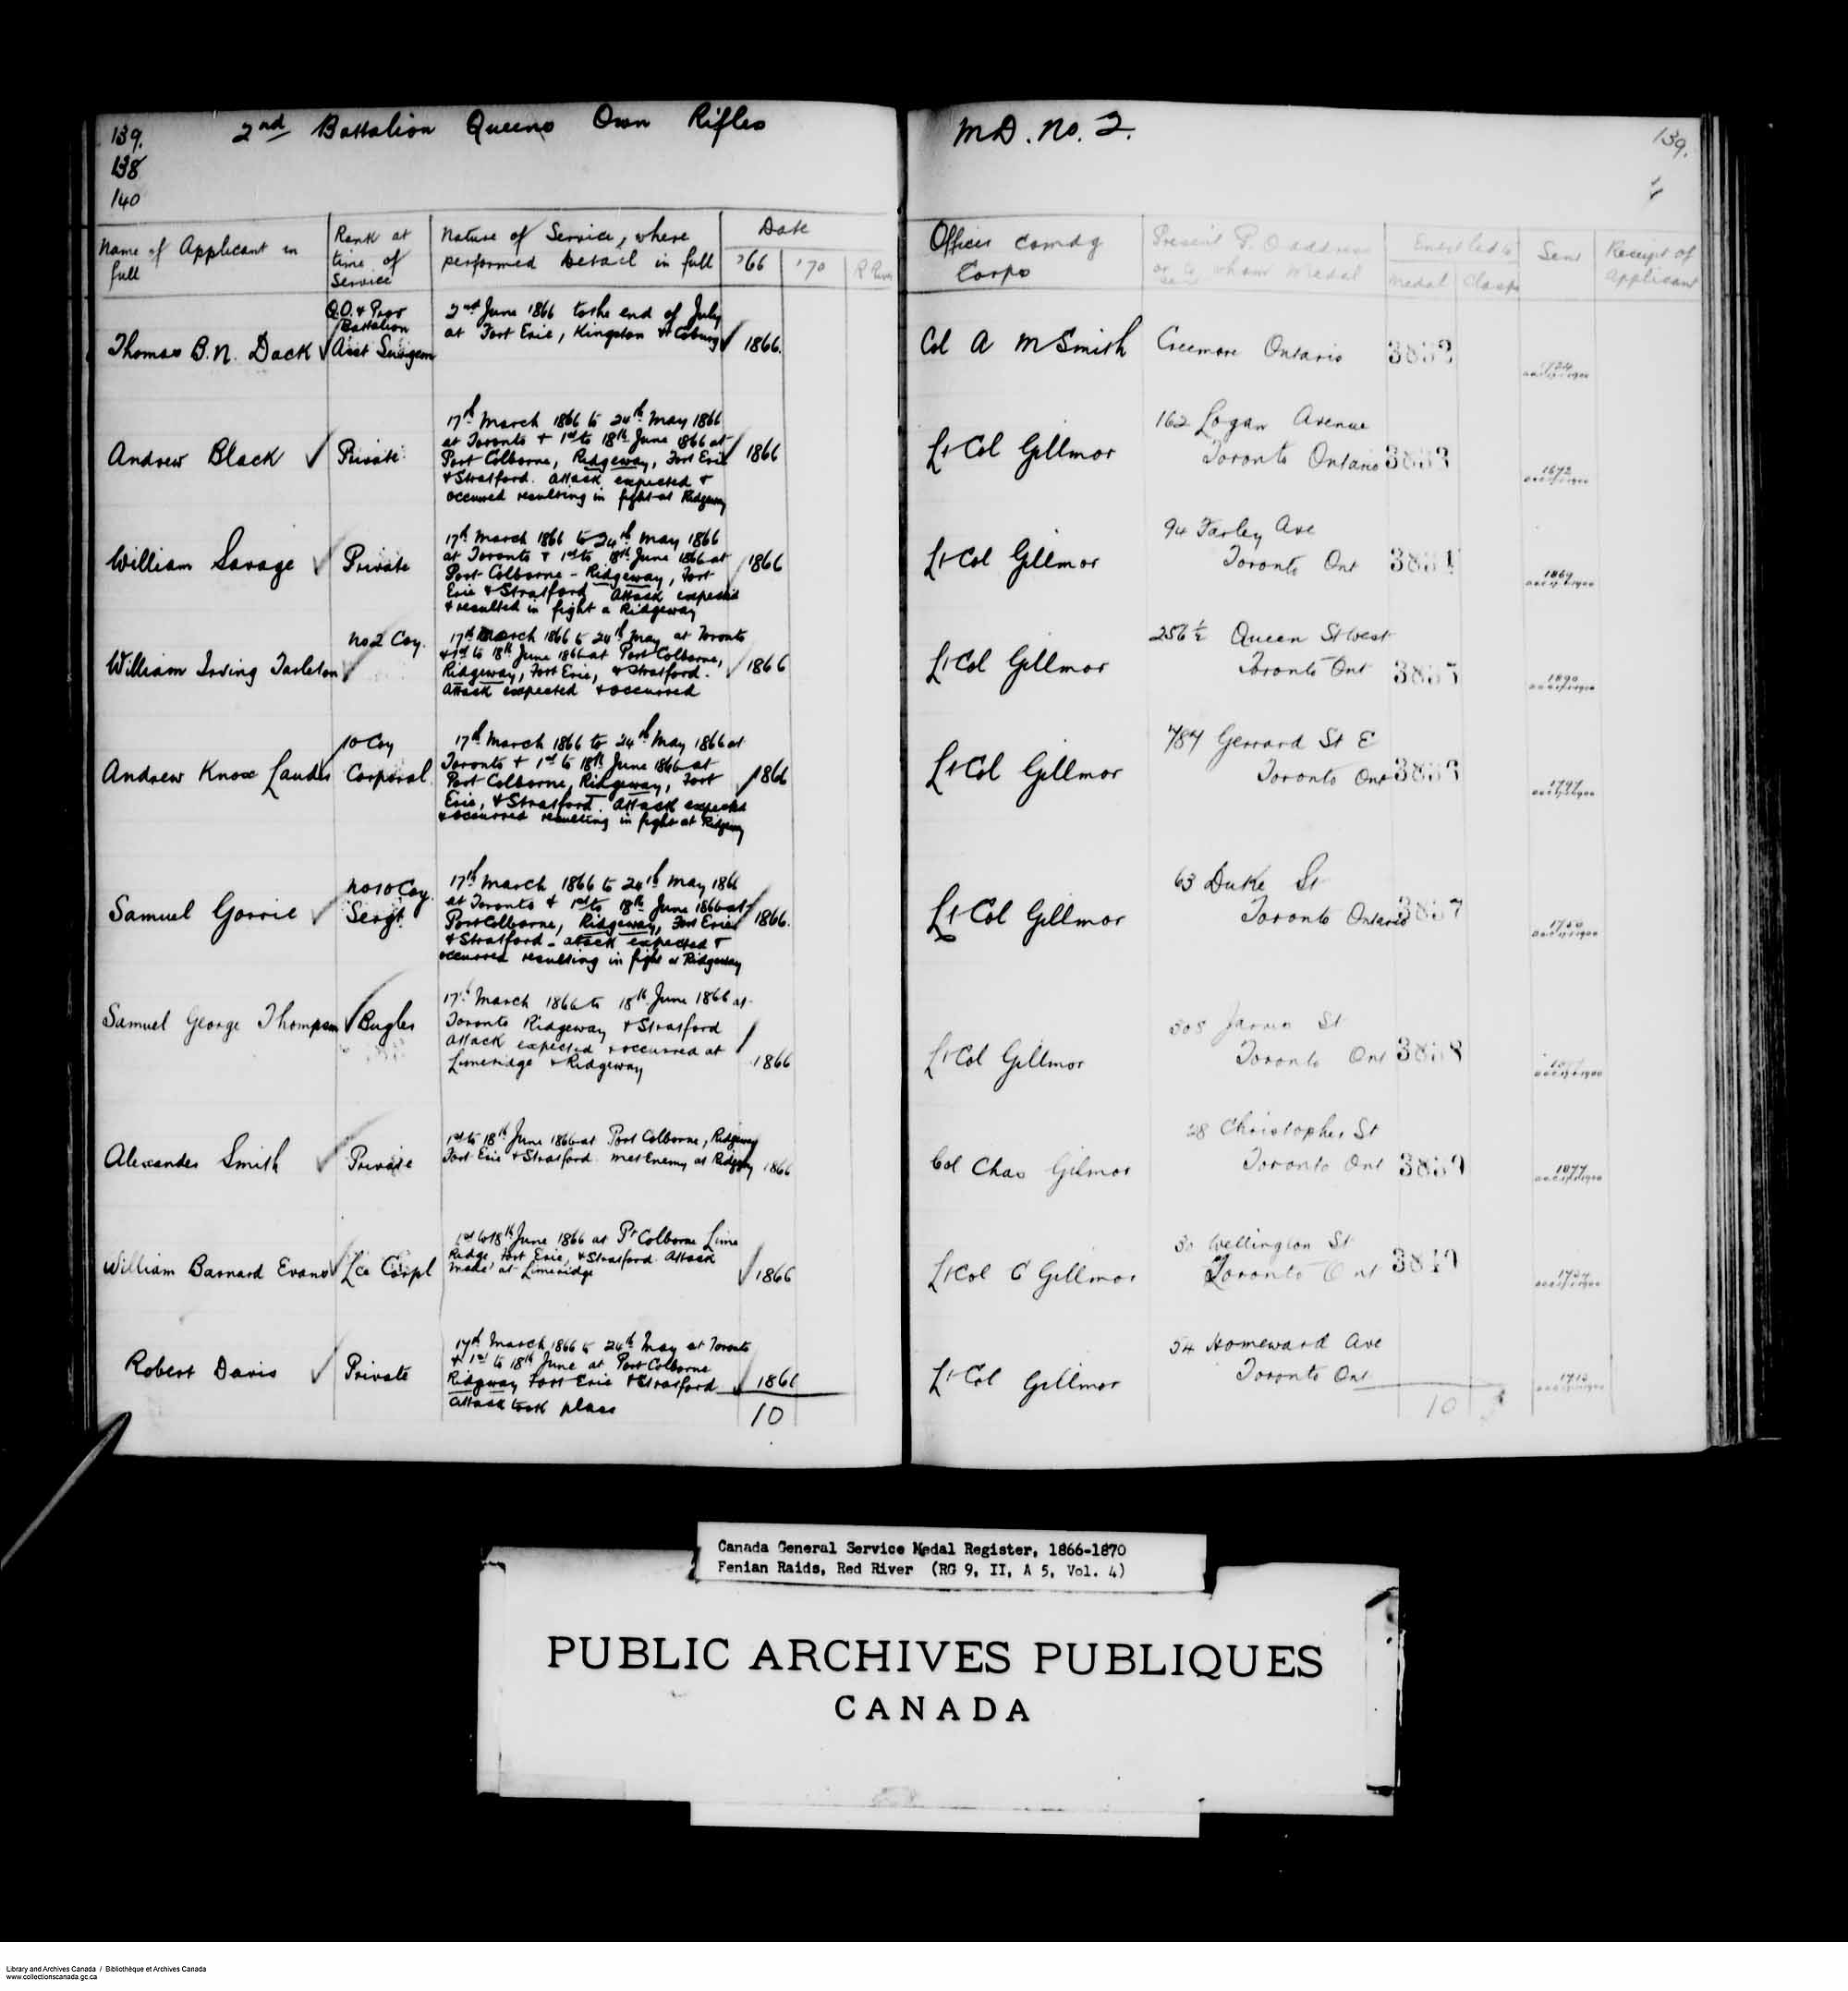 Digitized page of Medals, Honours and Awards for Image No.: e008681826